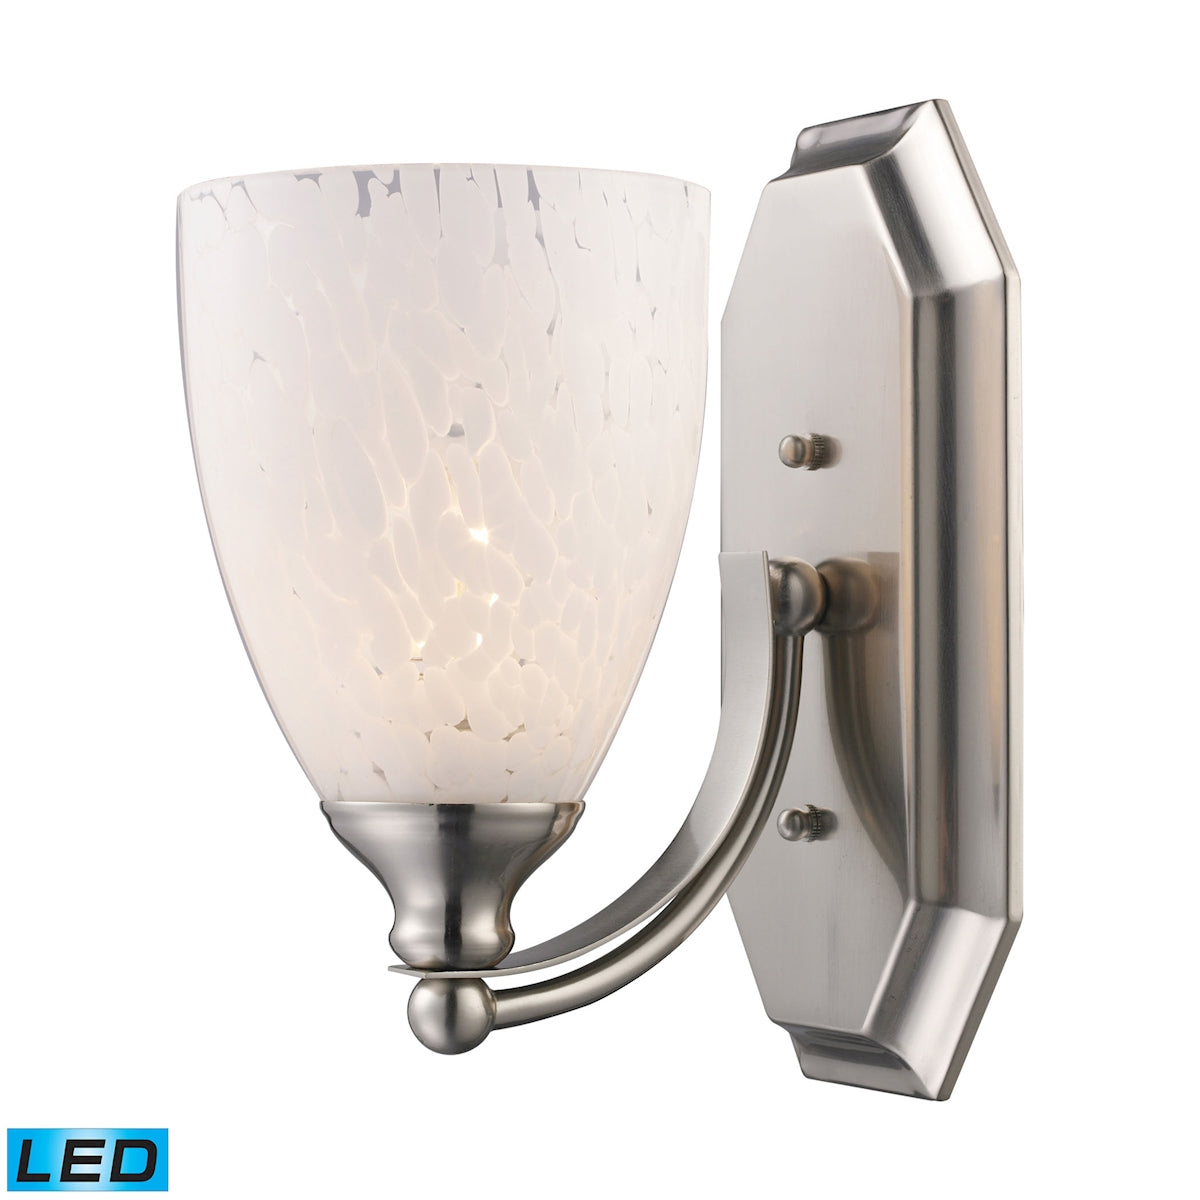 ELK Lighting 570-1N-SW-LED Mix-N-Match Vanity 1-Light Wall Lamp in Satin Nickel with Snow White Glass - Includes LED Bulb